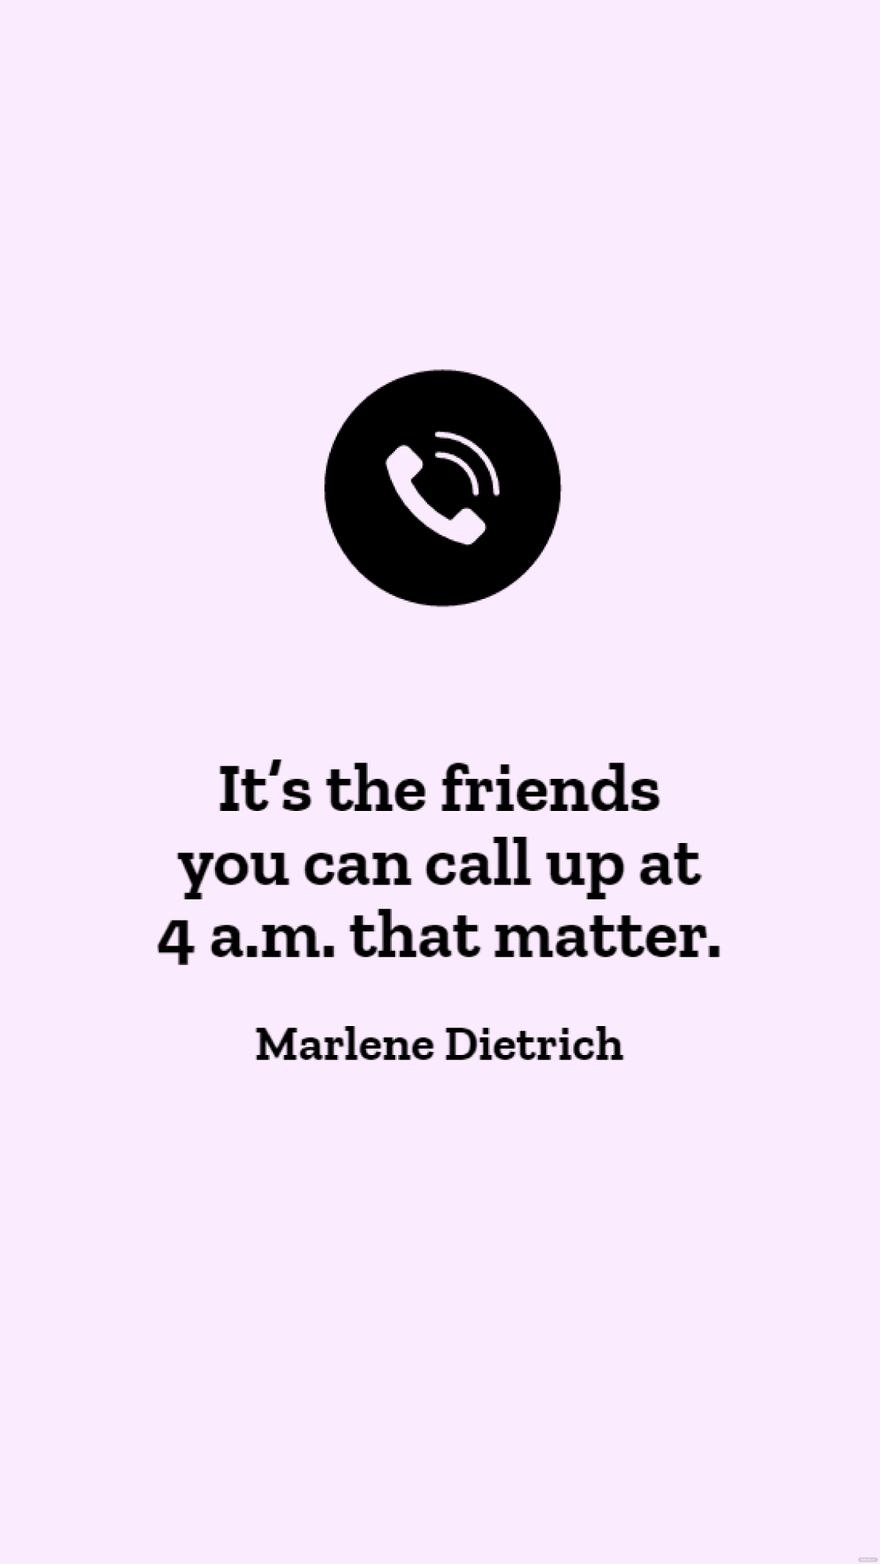 Free Marlene Dietrich - It’s the friends you can call up at 4 a.m. that matter. in JPG